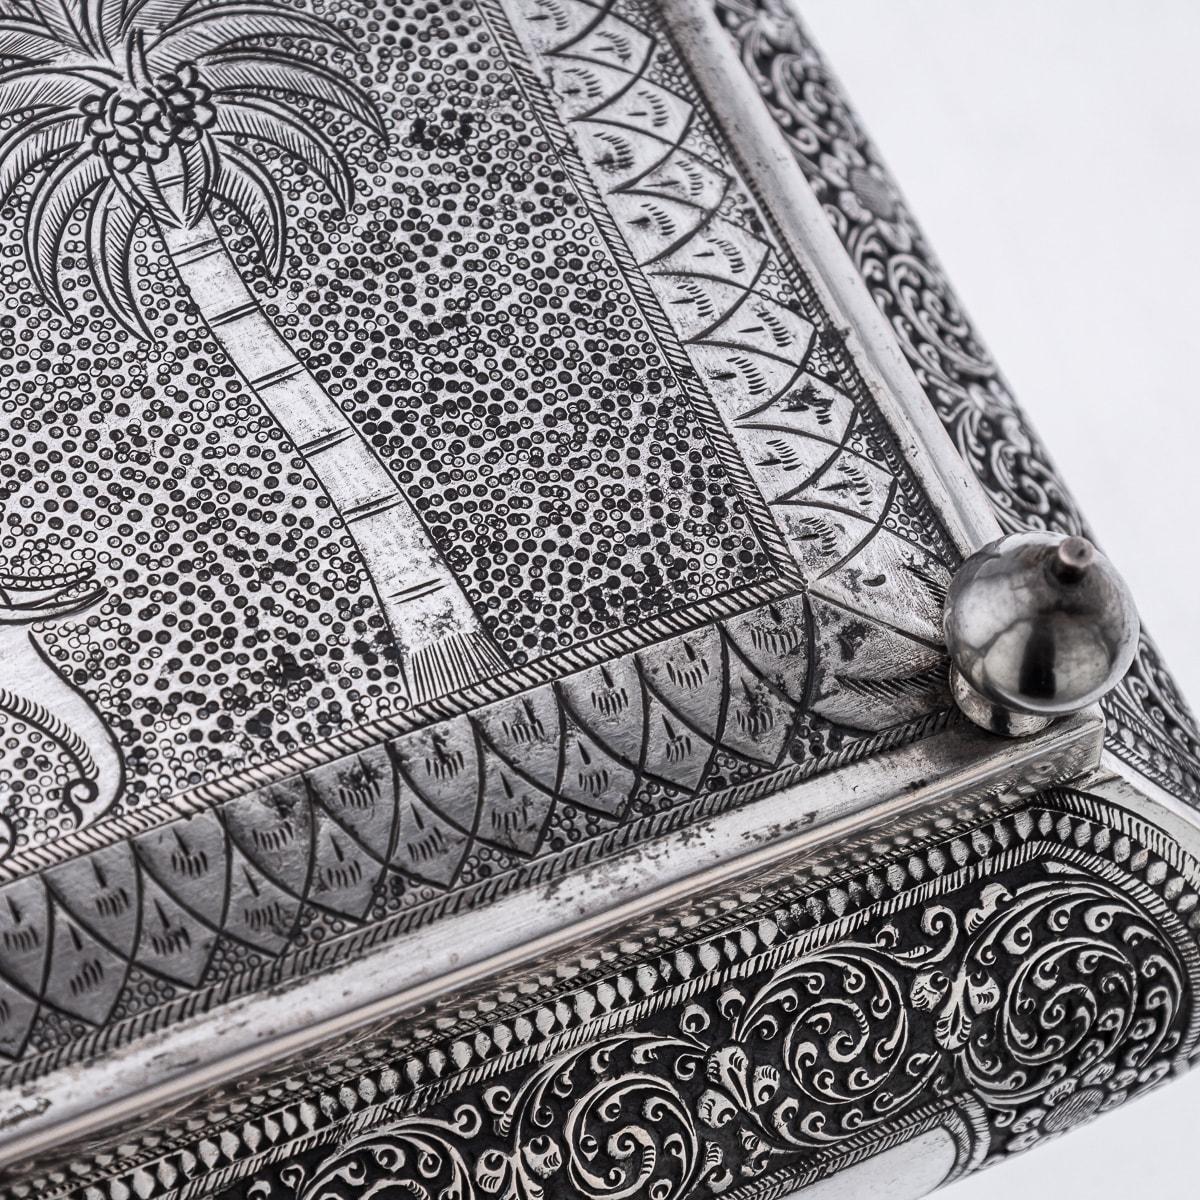 Mid 20th Century Sri Lankan Solid Silver Repousse Box, Colombo c.1930 For Sale 13